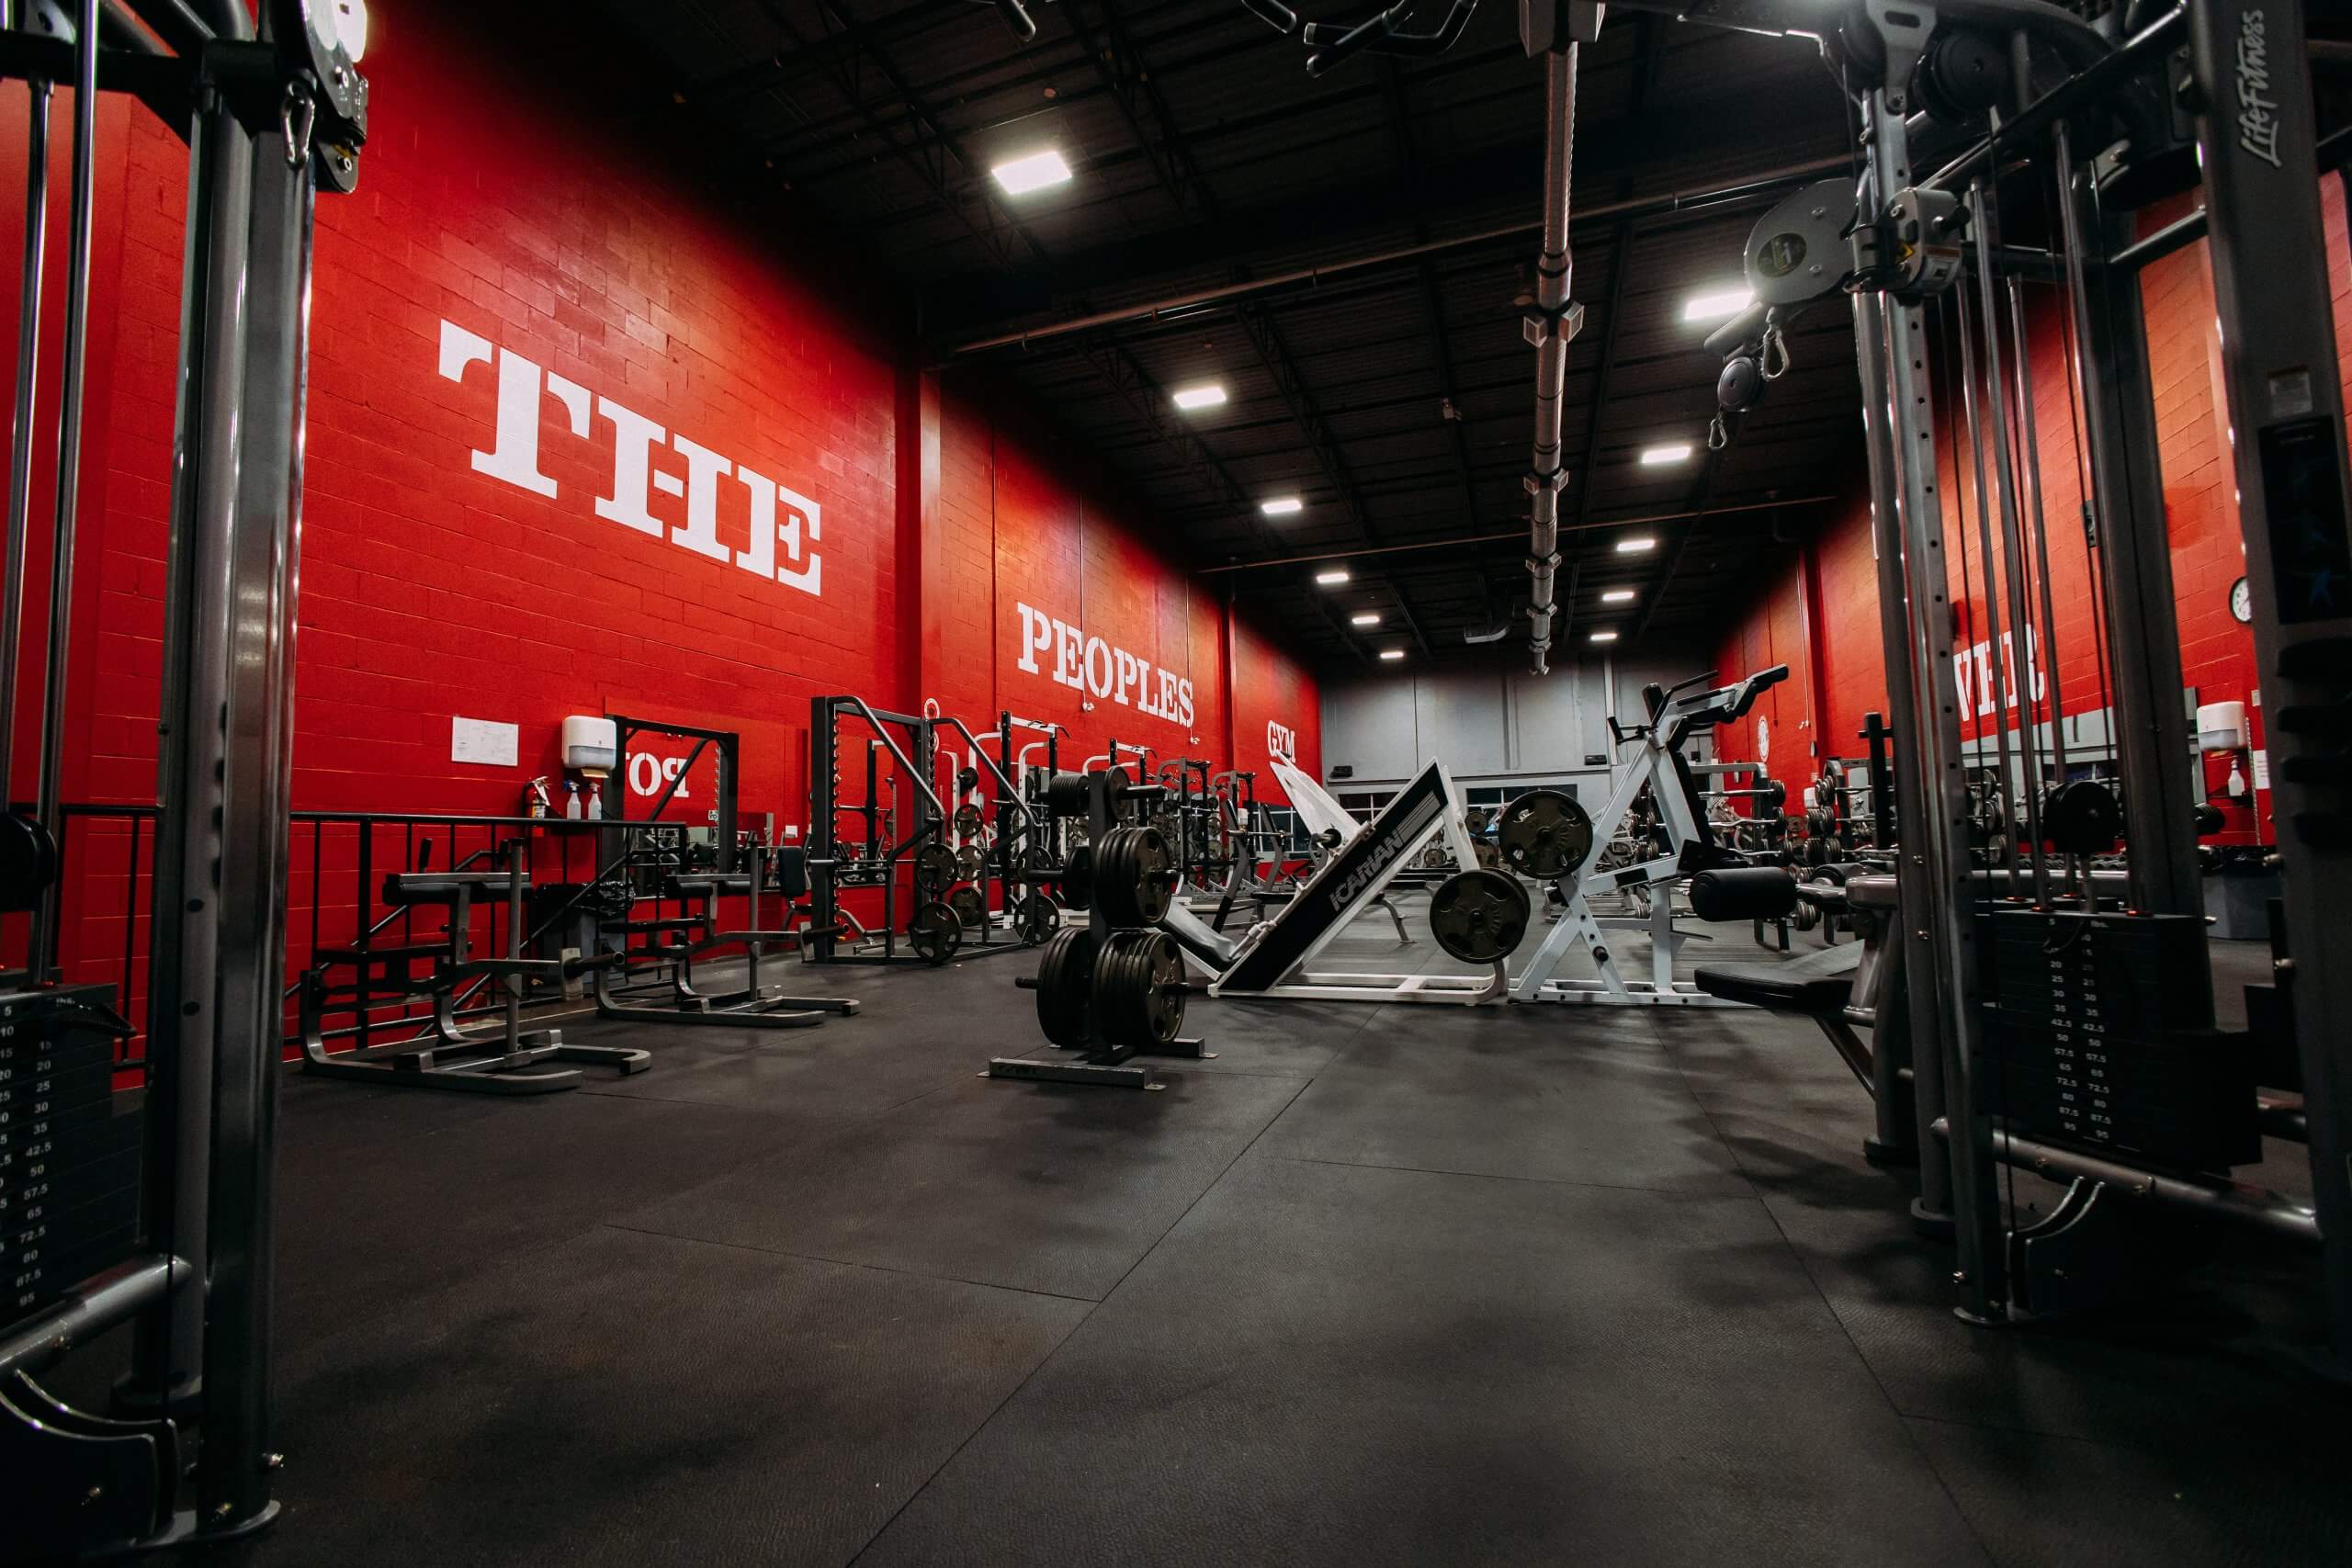 An Thumbnail Image of the Mississauga, Canada Powerhouse Gym Location